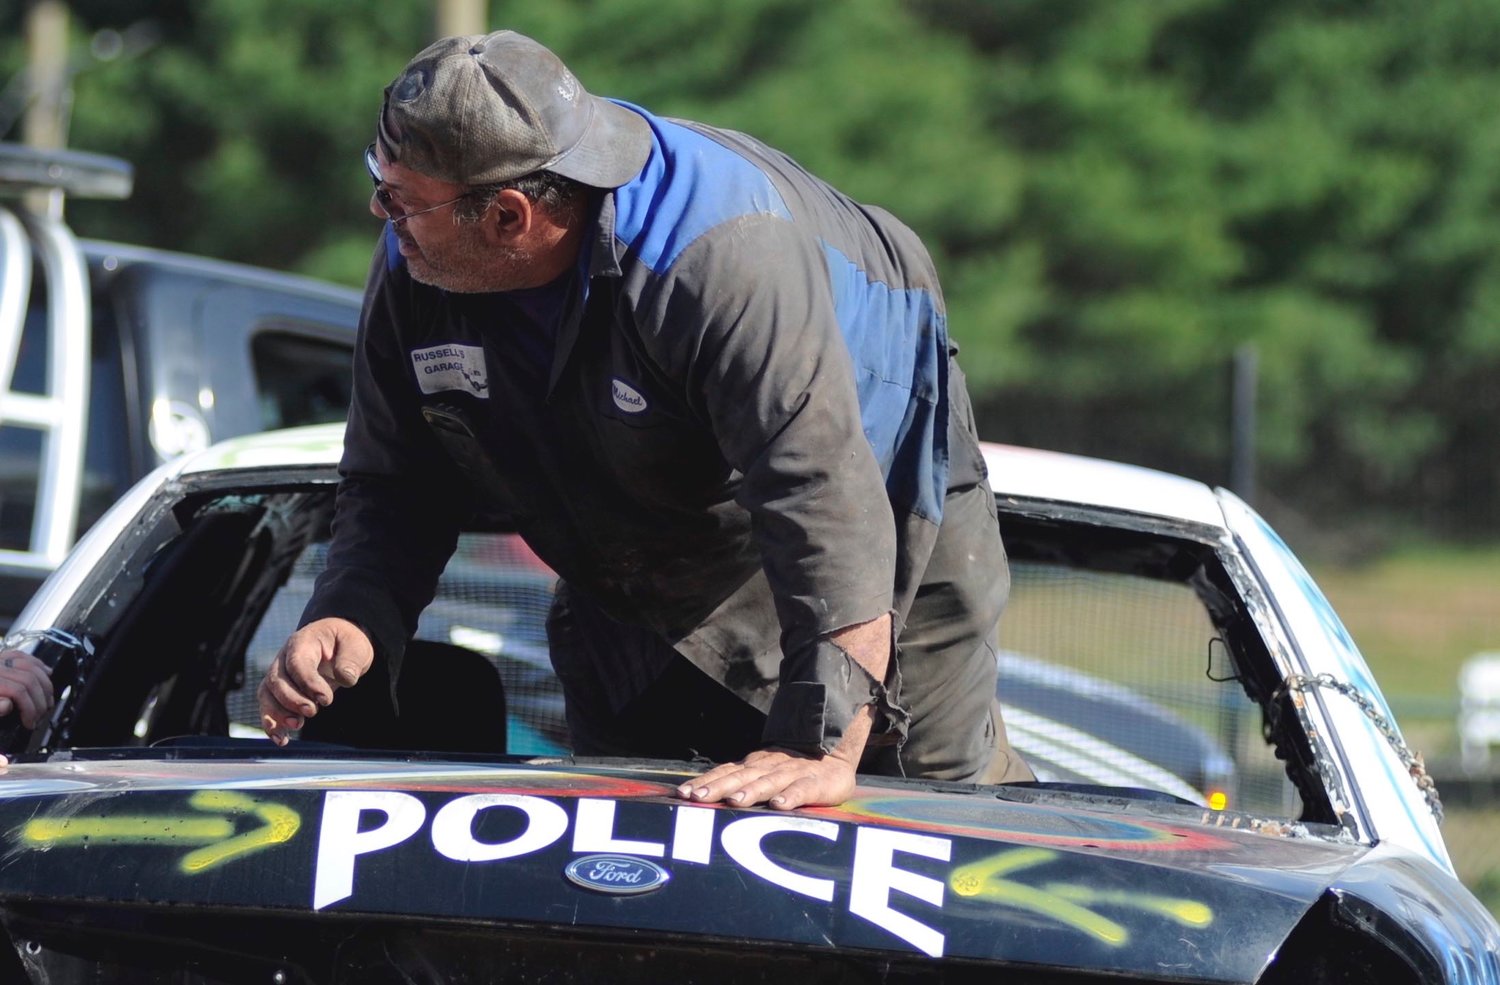 Exit lane. Michael Wiener, owner of Russell’s Garage in Loch Sheldrake, NY climbs out the rear window of his Ford Crown Victoria racecar, “Police.”